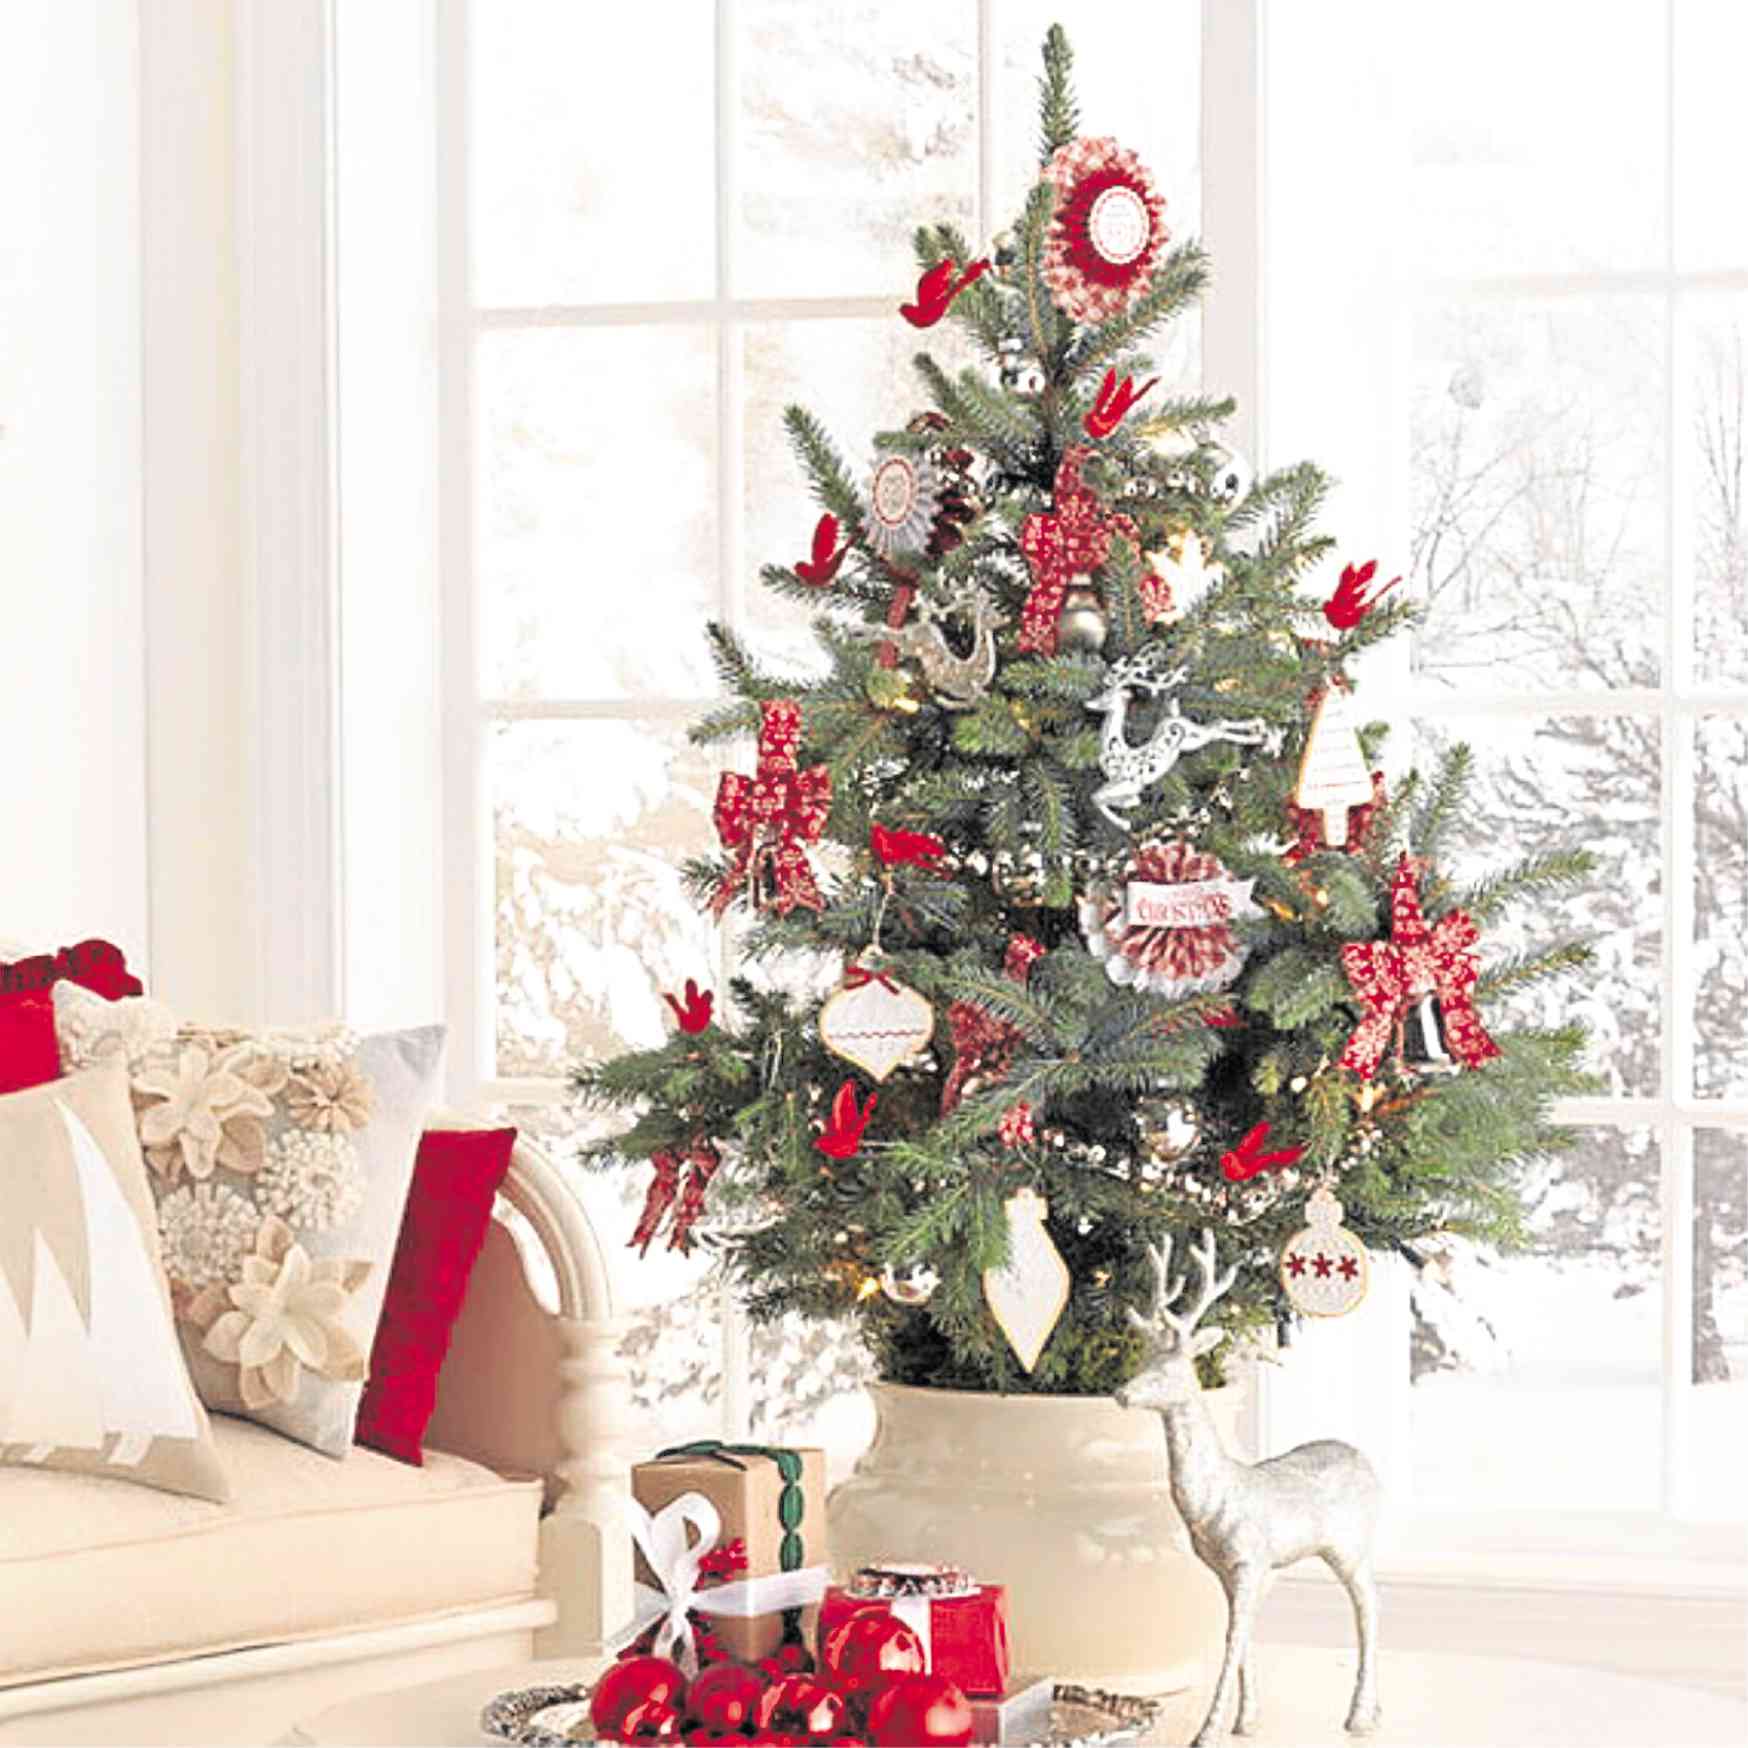 Holiday decorating ideas for small spaces | Inquirer Business